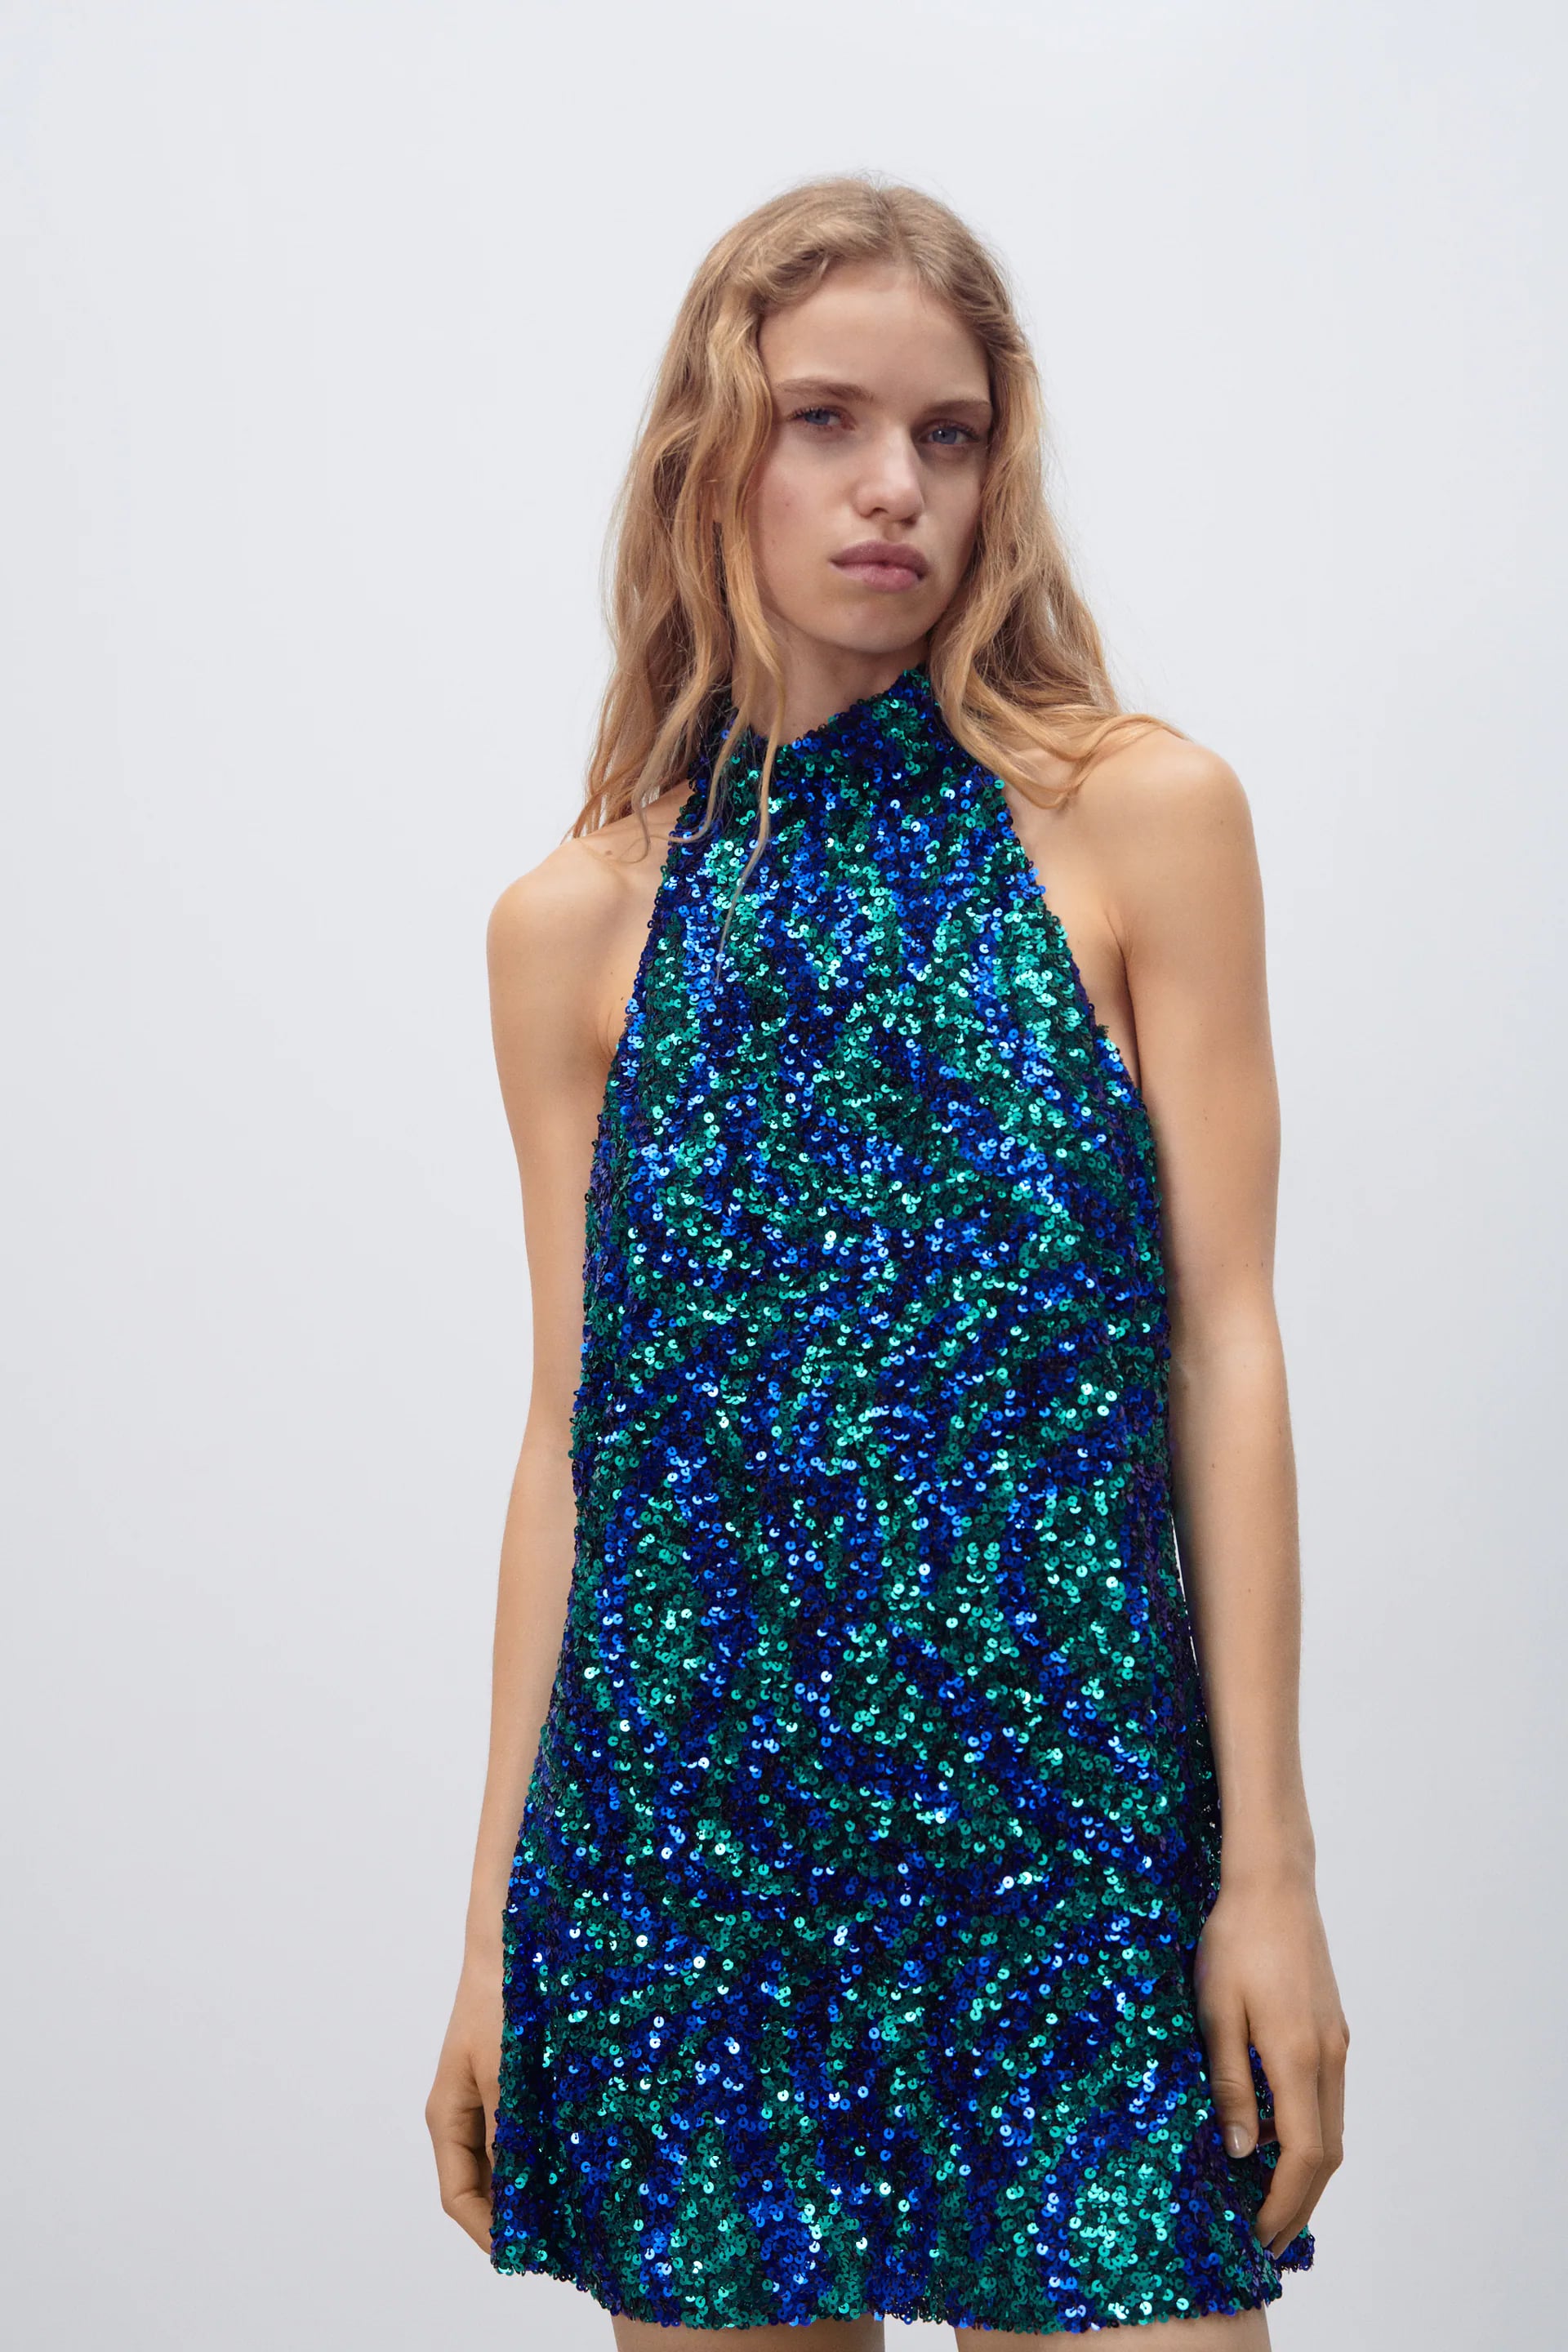 Zara Sparkly Sequin Dress, £59 - Luxe For Less! Glam Christmas Party Dresses  Under £100 - Heart